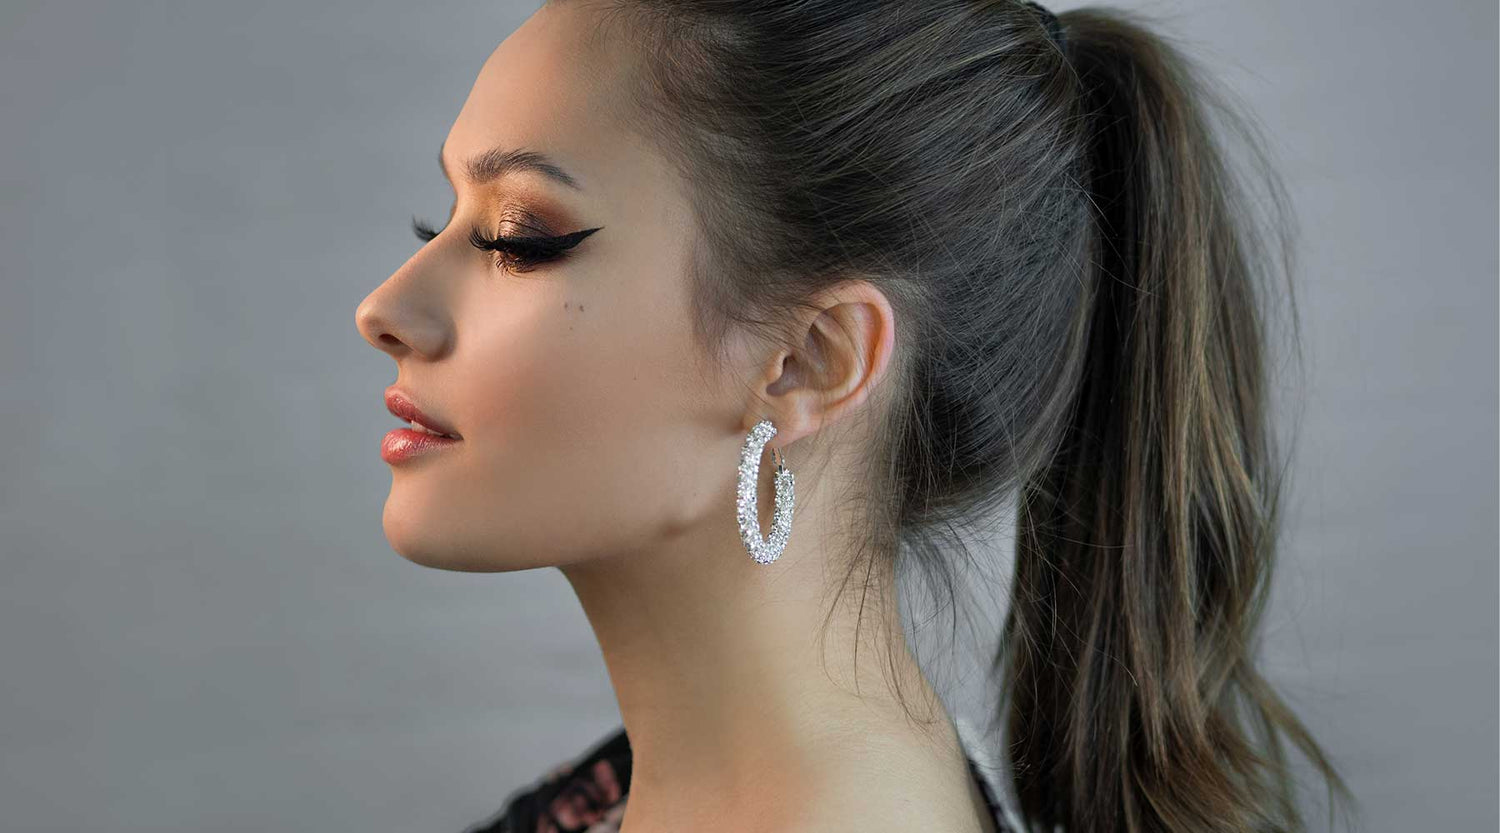 Model with soft glowing makeup, bronze eyeshadow and winged eyeliner